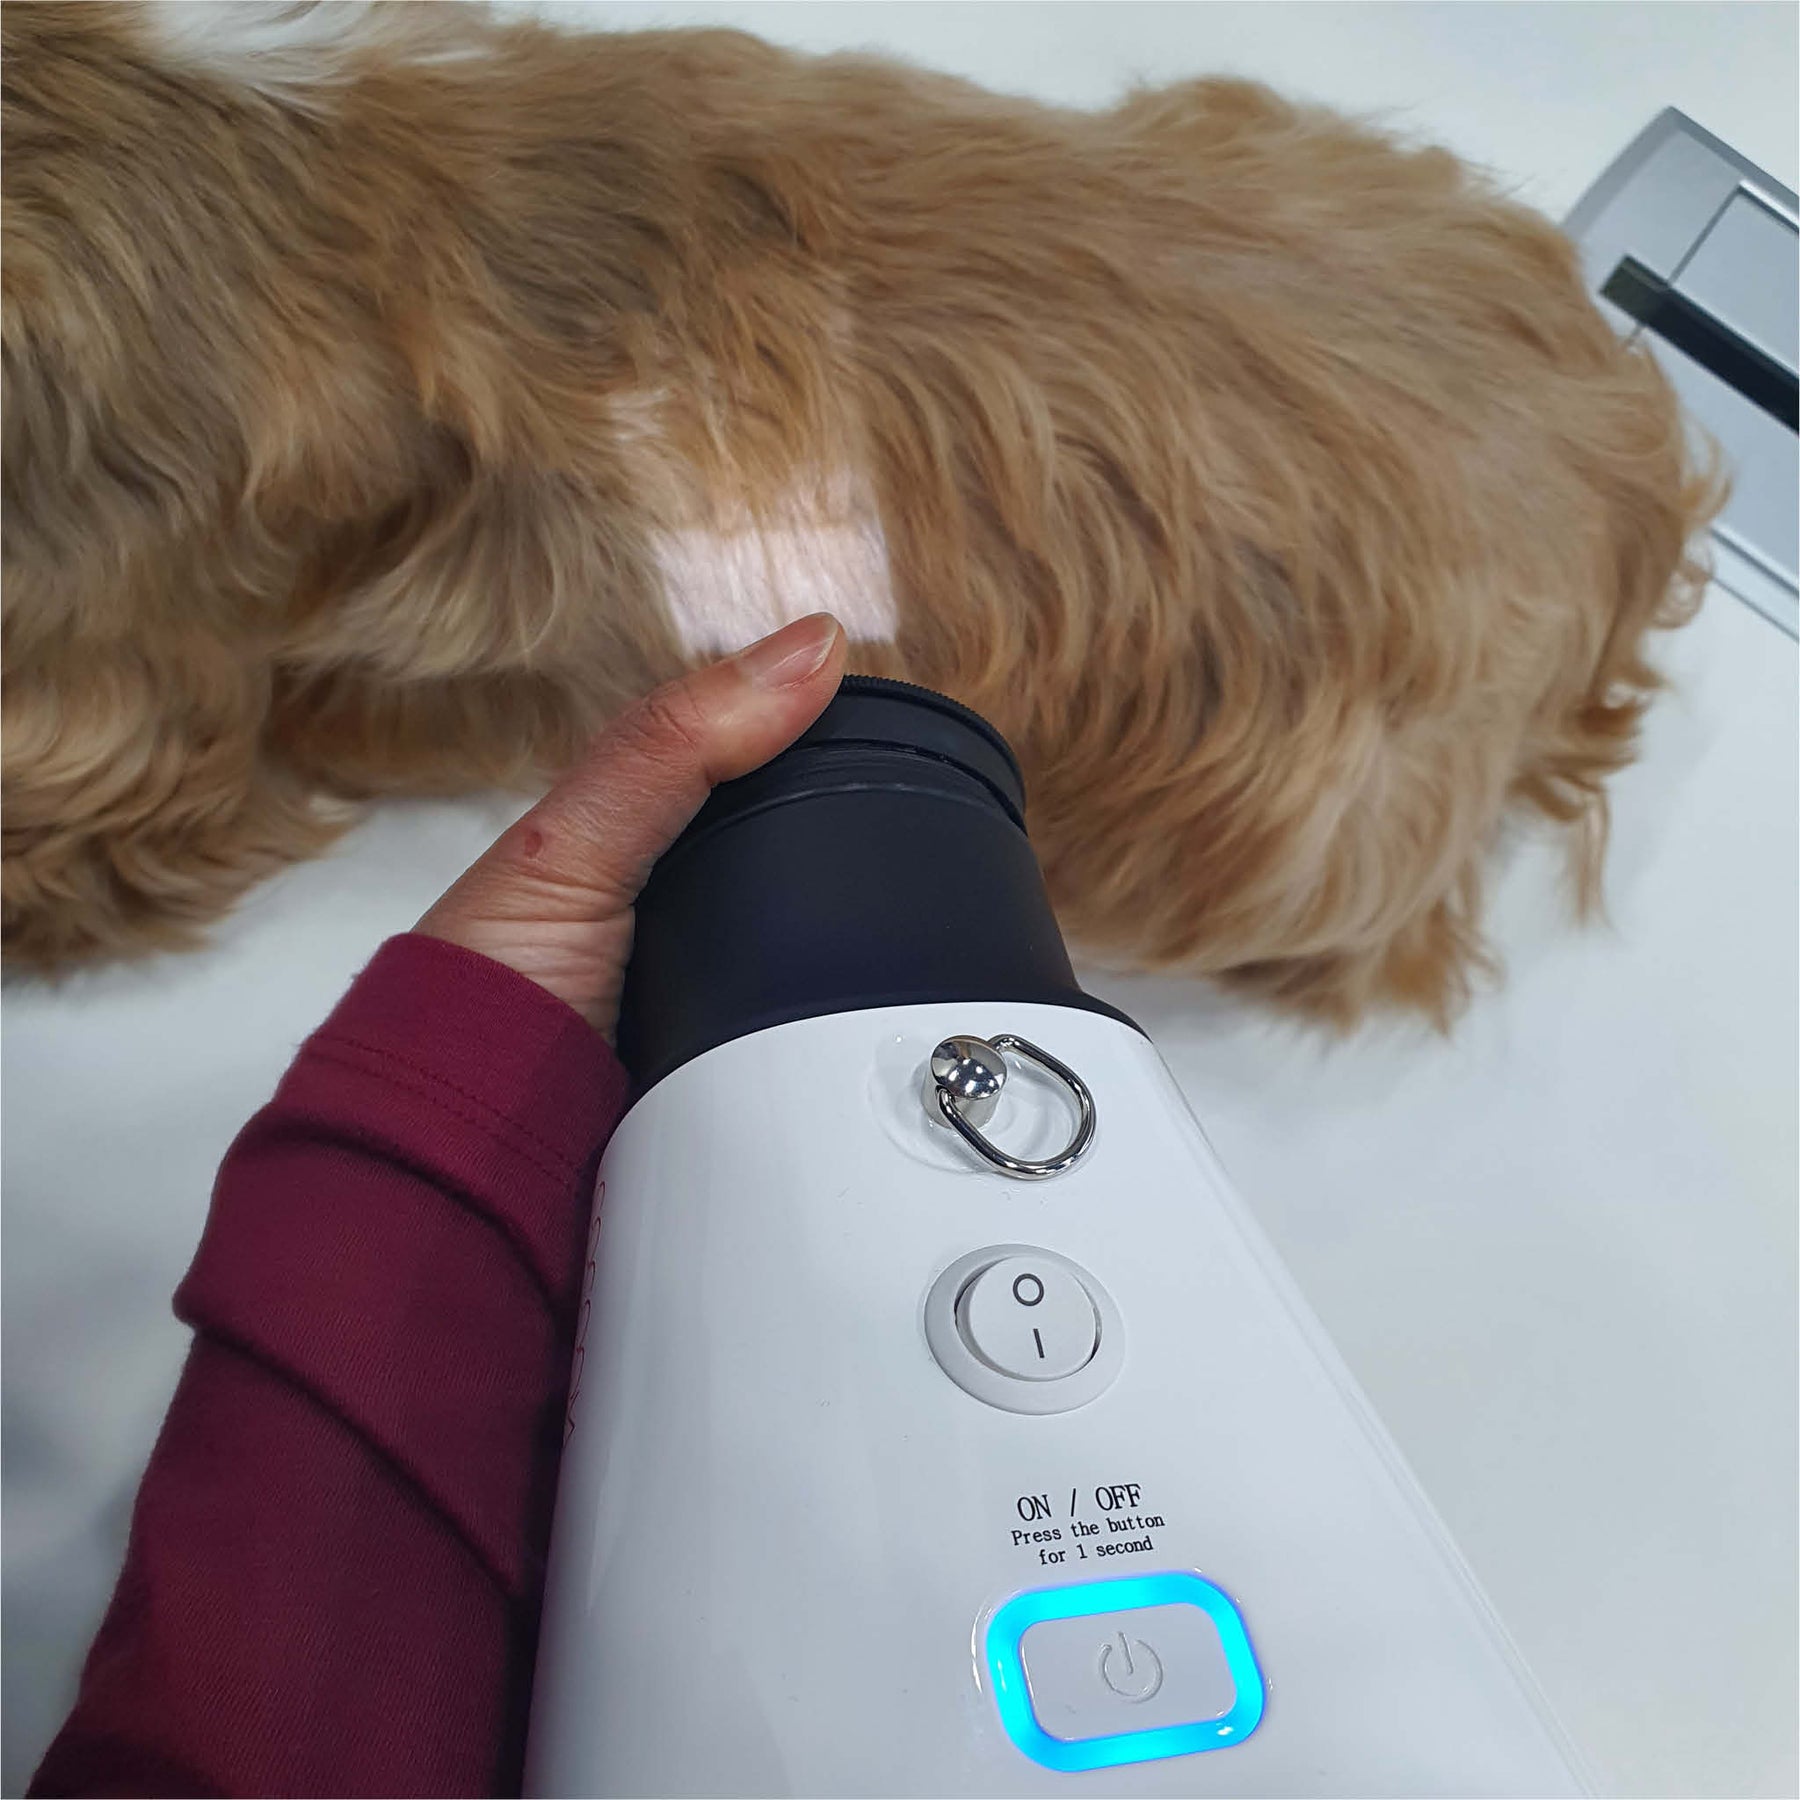 Dexcowin COCOON Handheld Vet X-ray portable unit for animals of all sizes